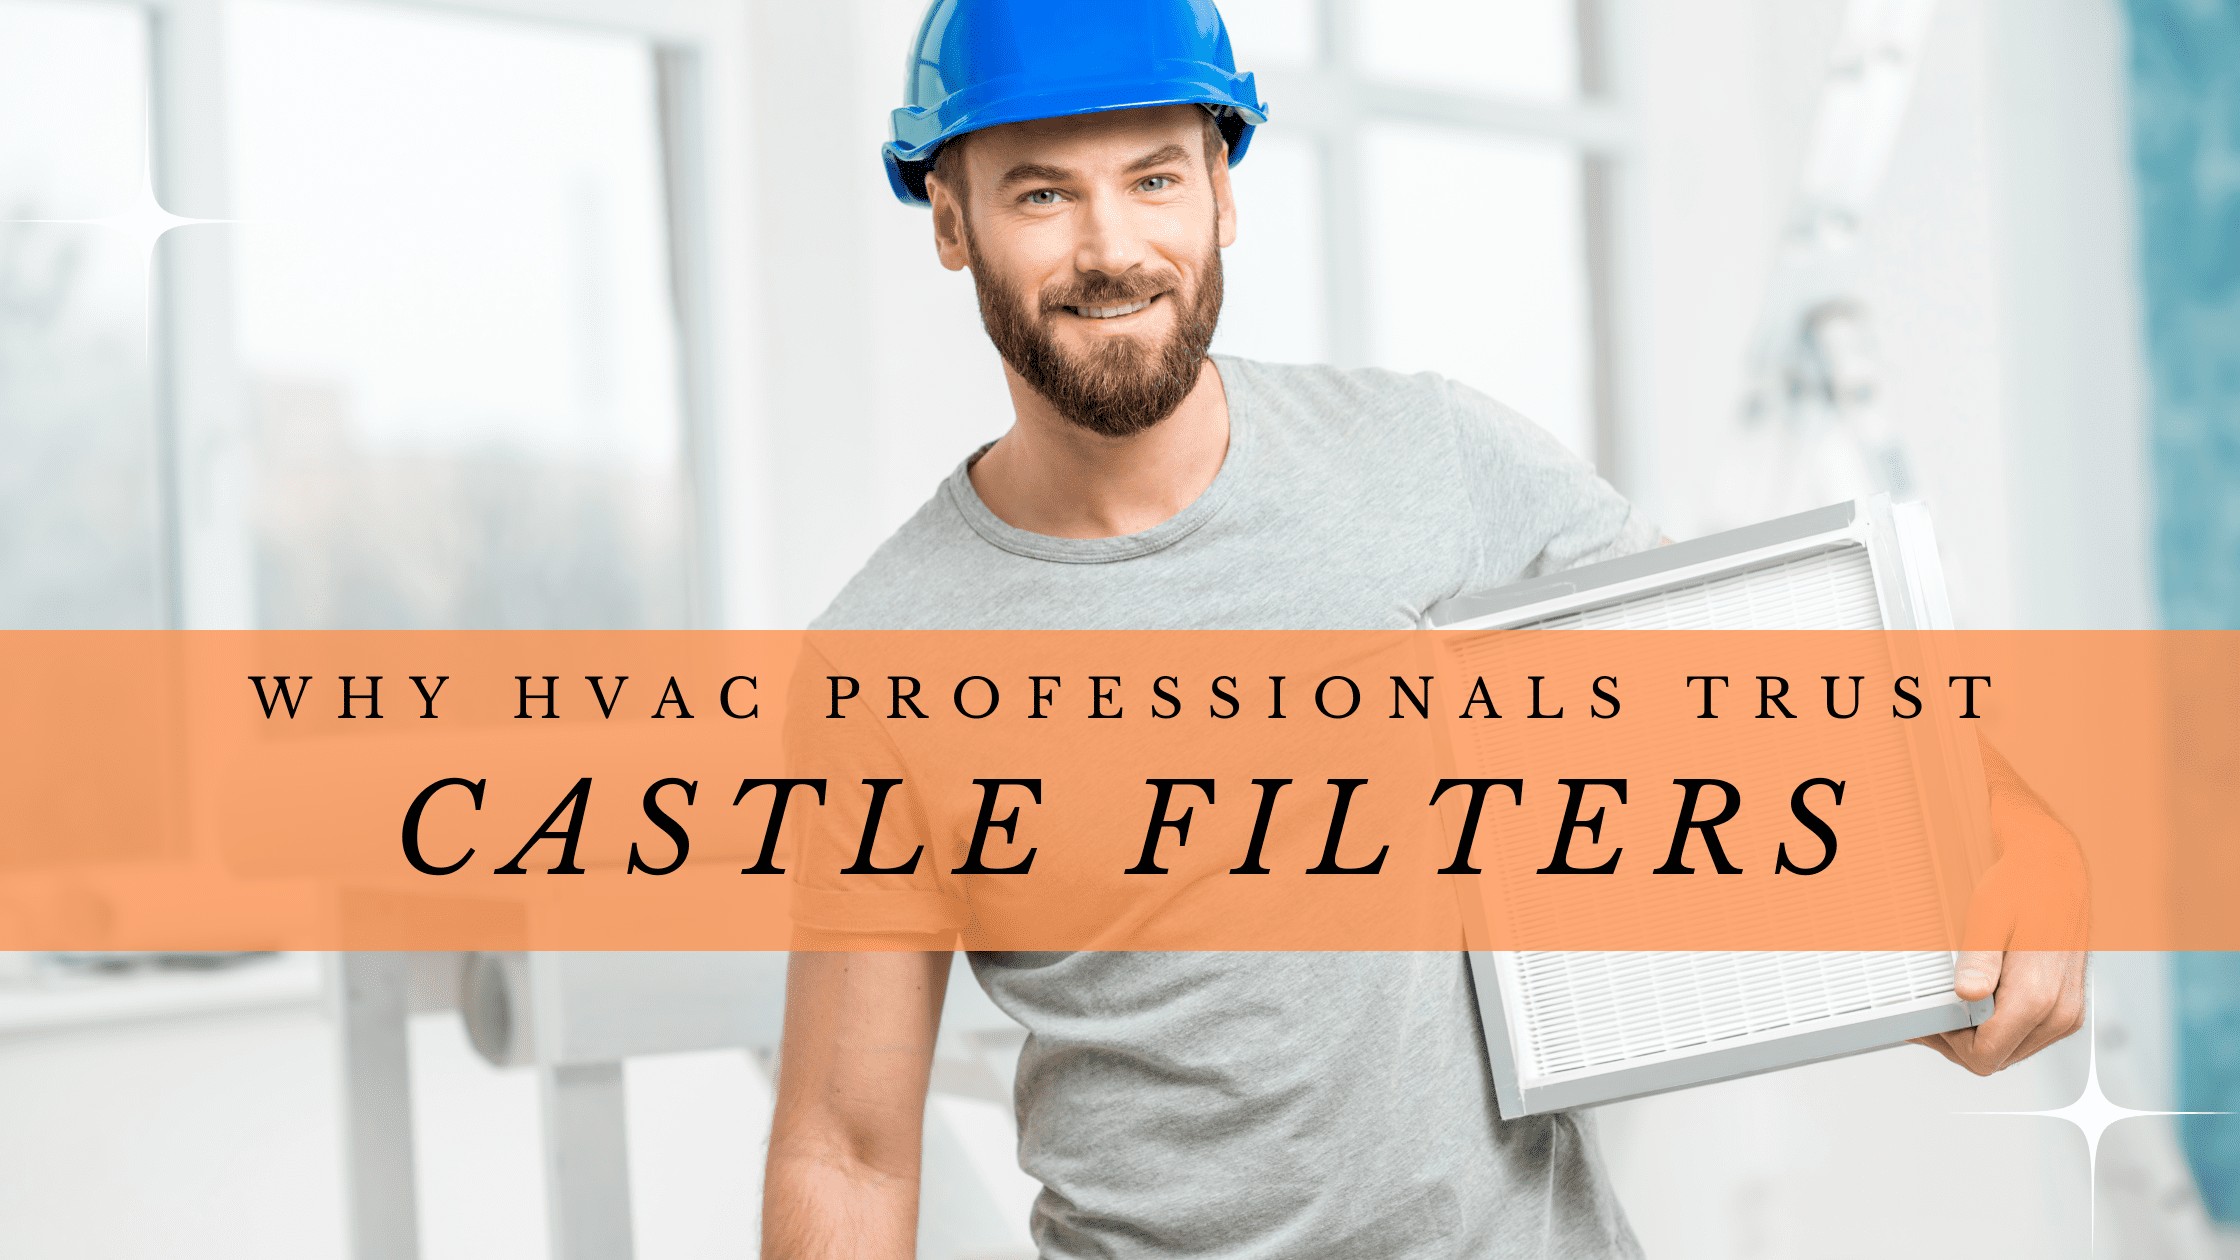 5 Reasons Why HVAC Professionals Trust Castle Filters